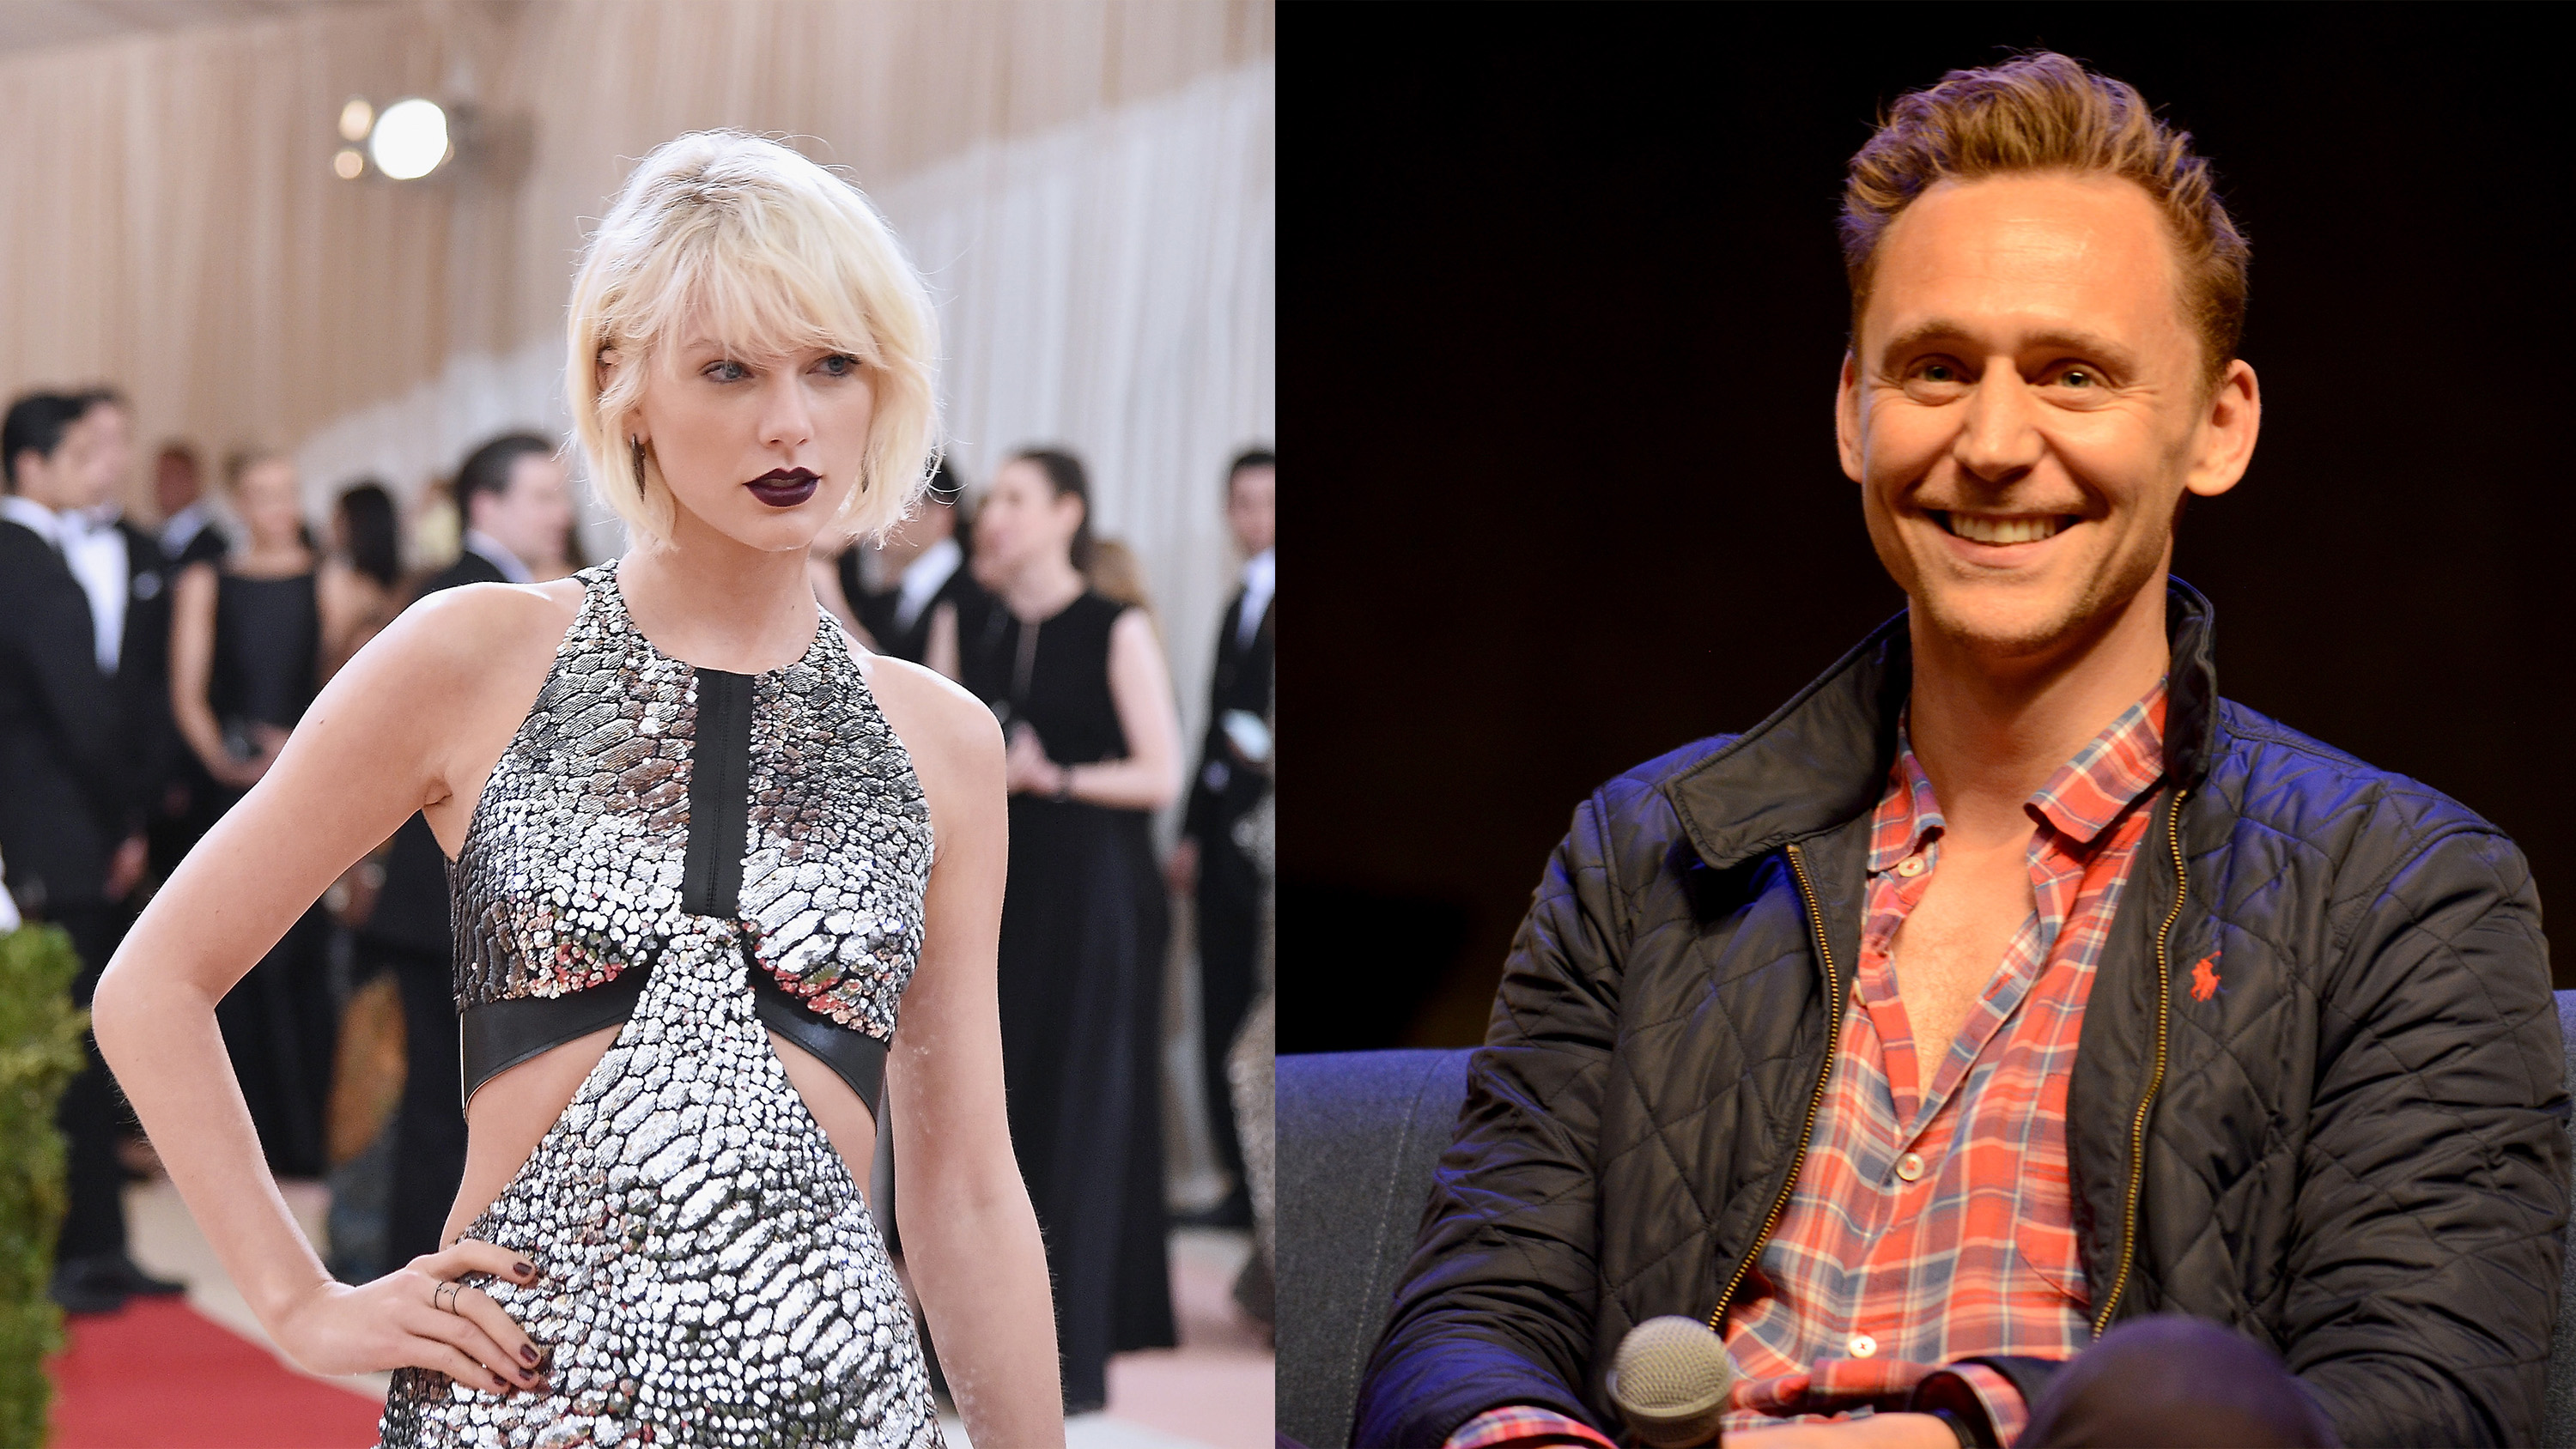 Taylor Swift and Tom Hiddleston (Mike Coppola/Getty Images for People.com; Albert L. Ortega—WireImage/Getty Images)